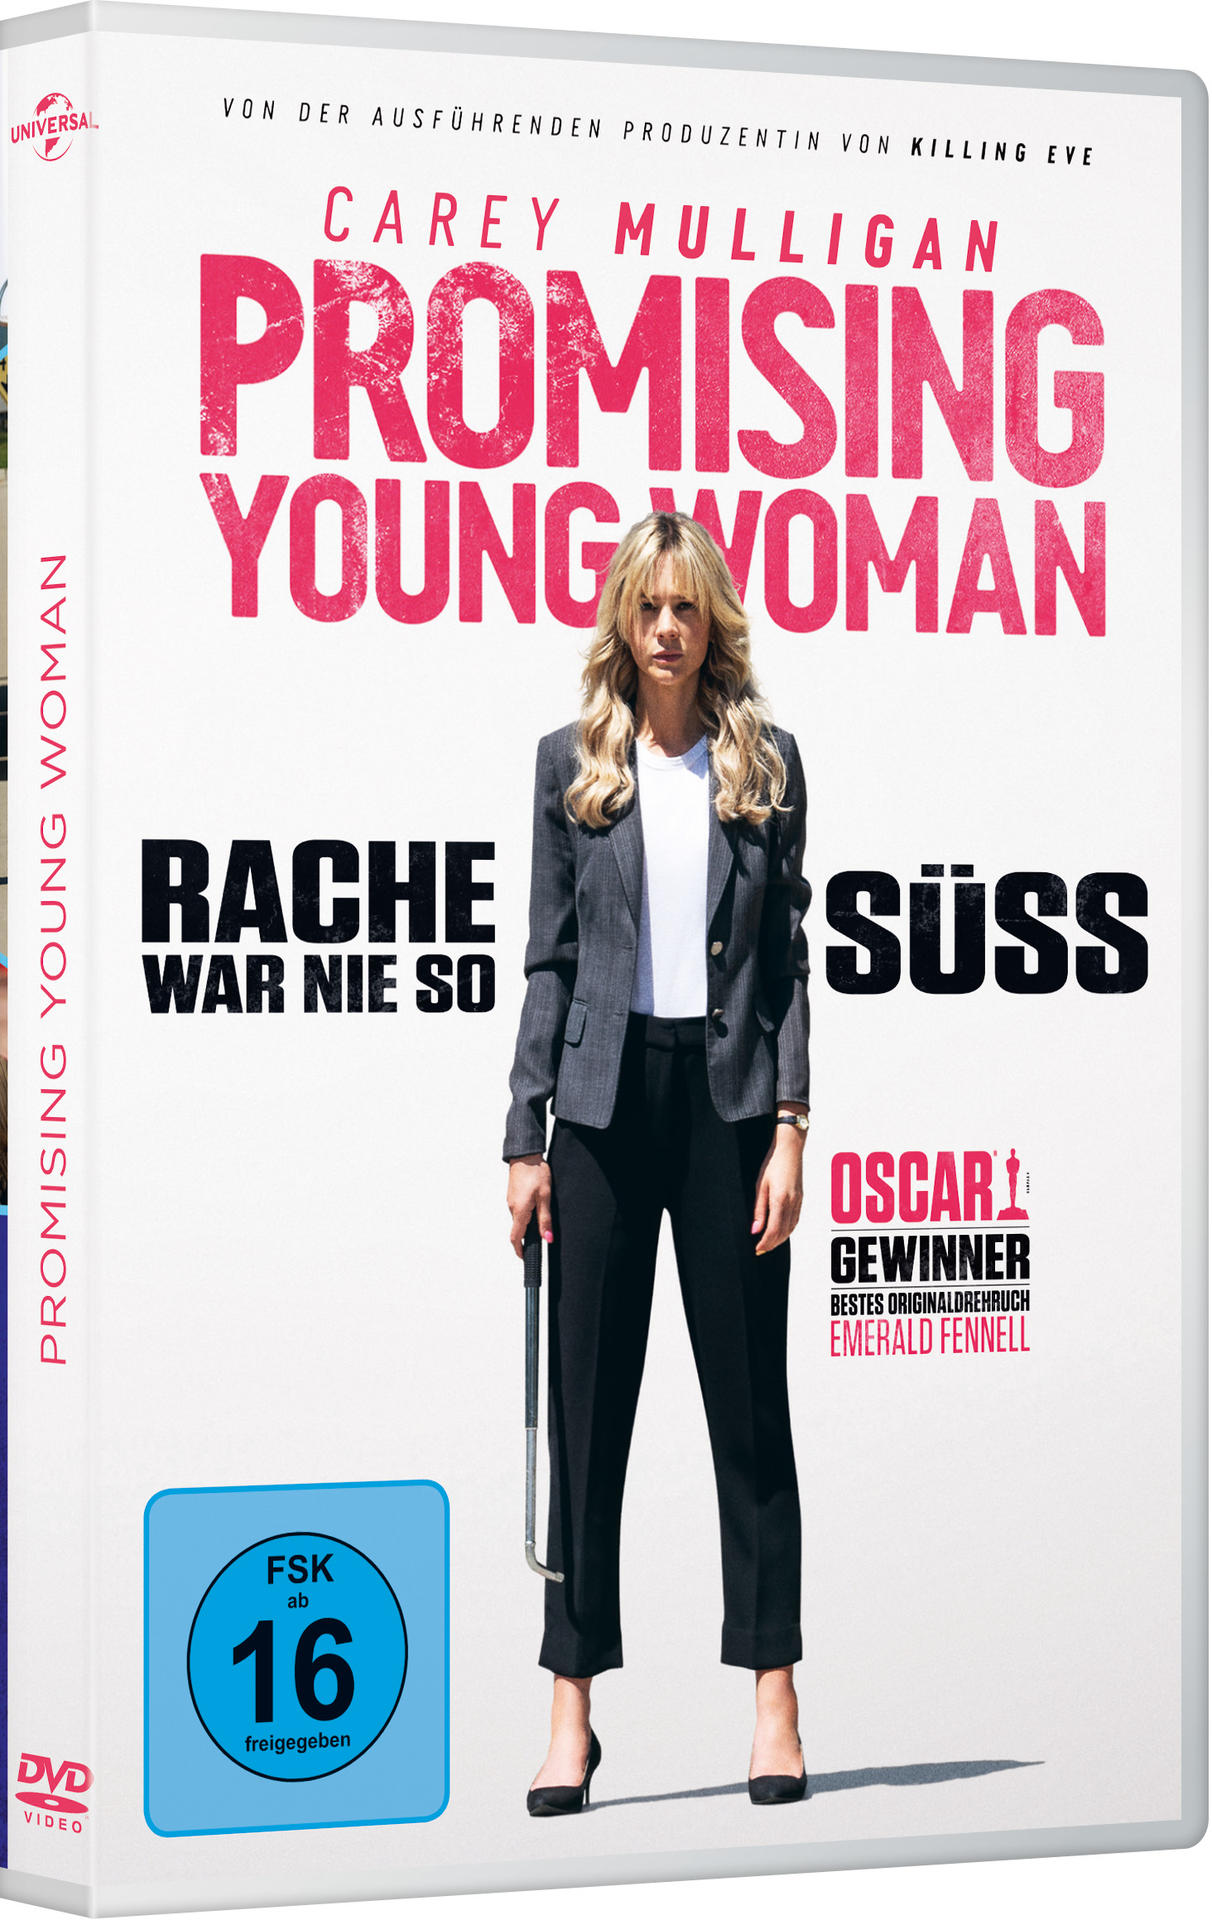 Young Promising Woman DVD